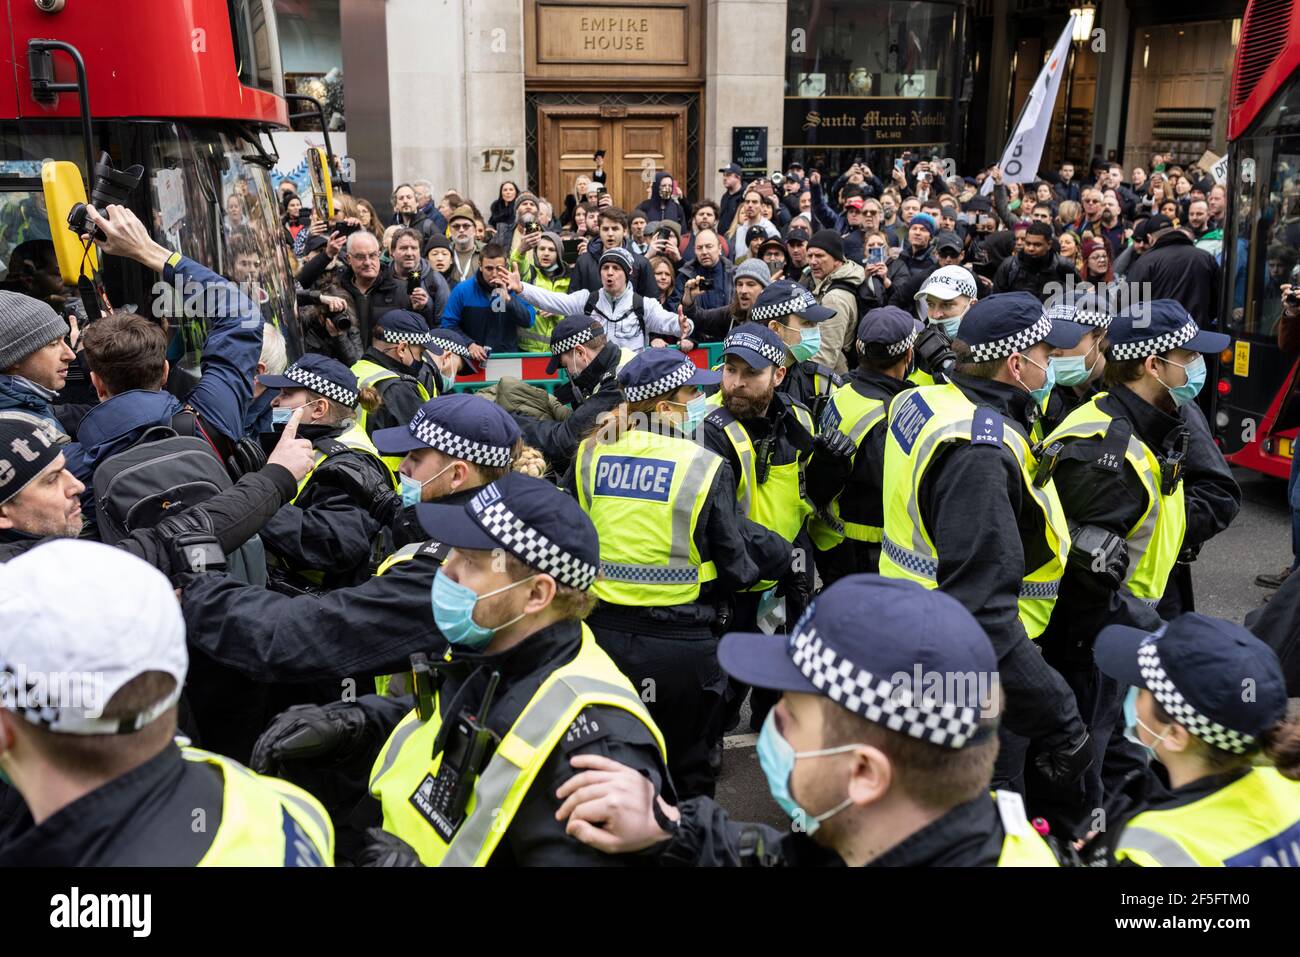 Anti-lockdown and anti Covid-19 vaccination protest, London, 20 March 2021. Police clashing with protesters. Stock Photo